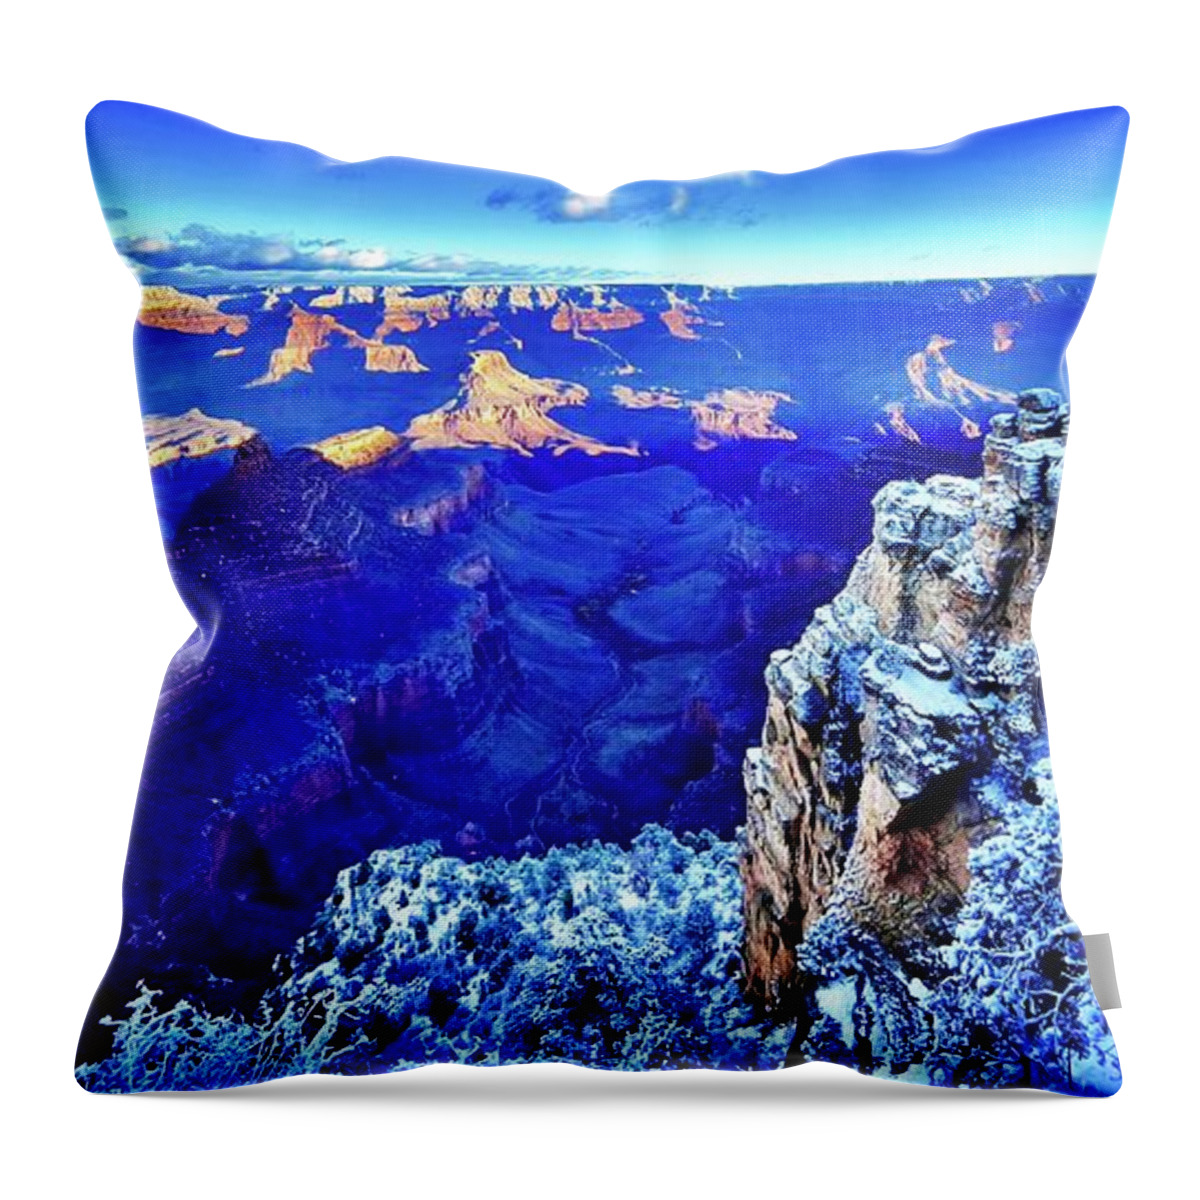 Landscape Throw Pillow featuring the photograph Awake The Snow Has Fallen by Kevyn Bashore